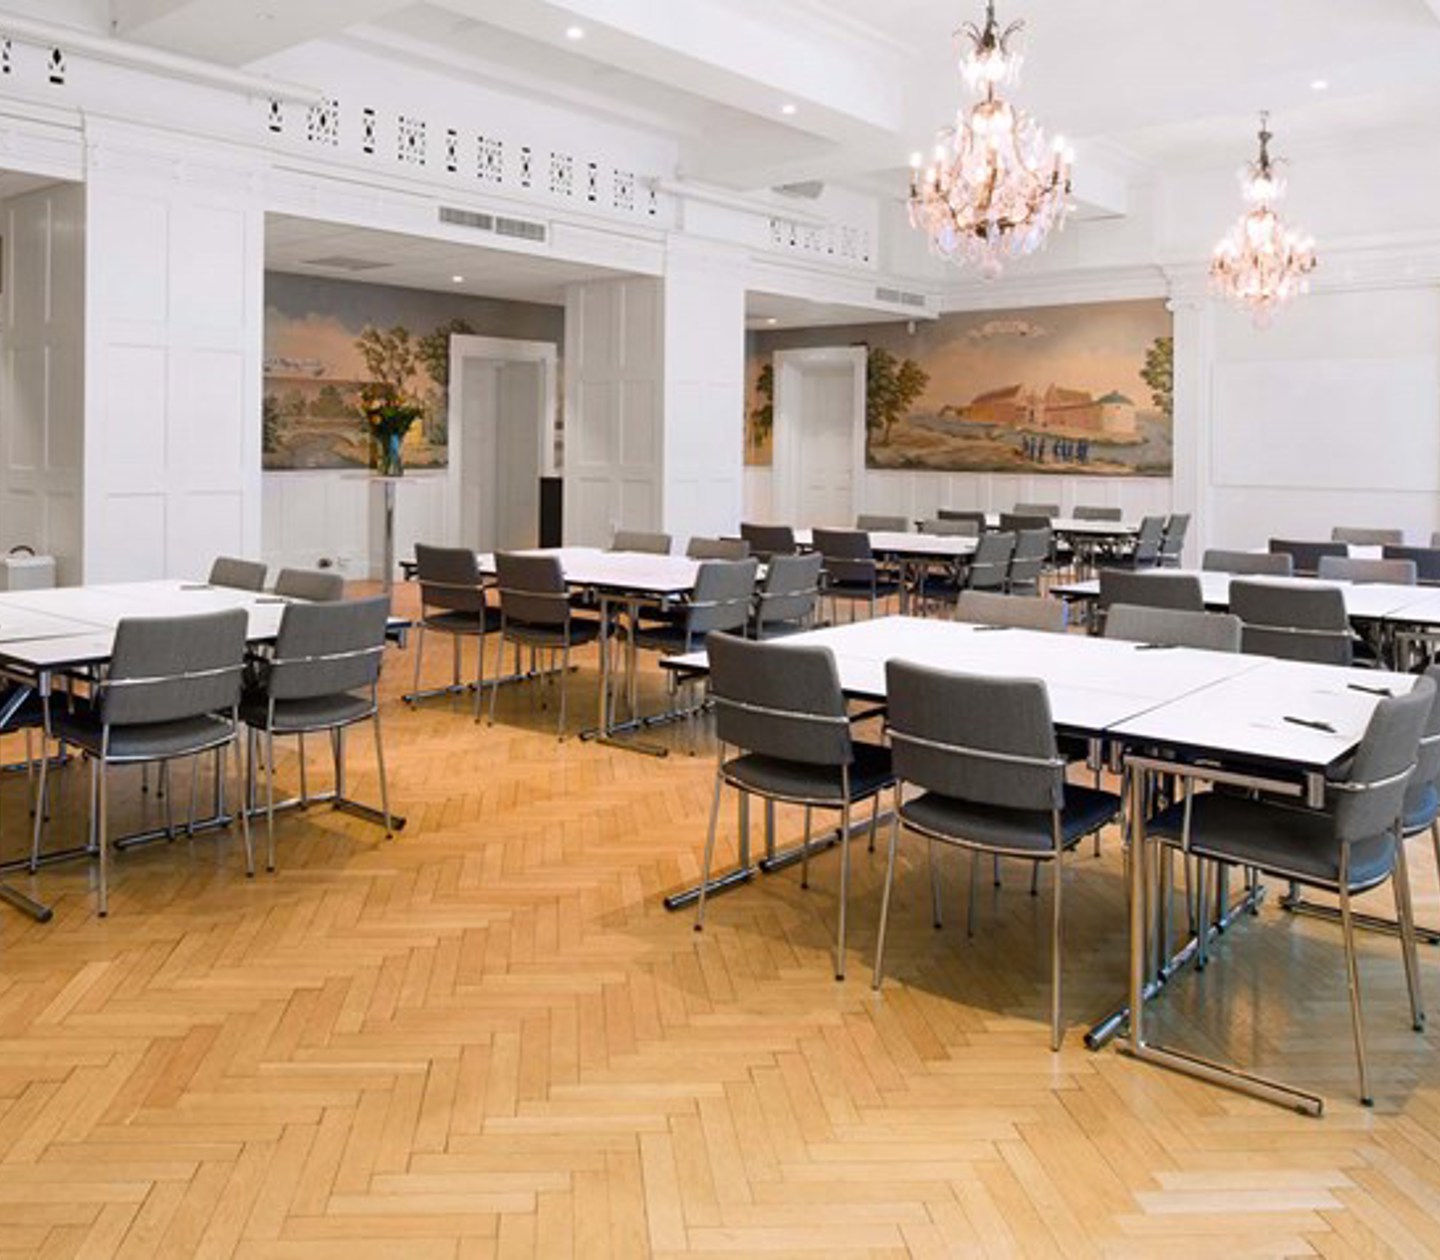 Conference room with crystal chandeliers on the ceiling prepared for meeting